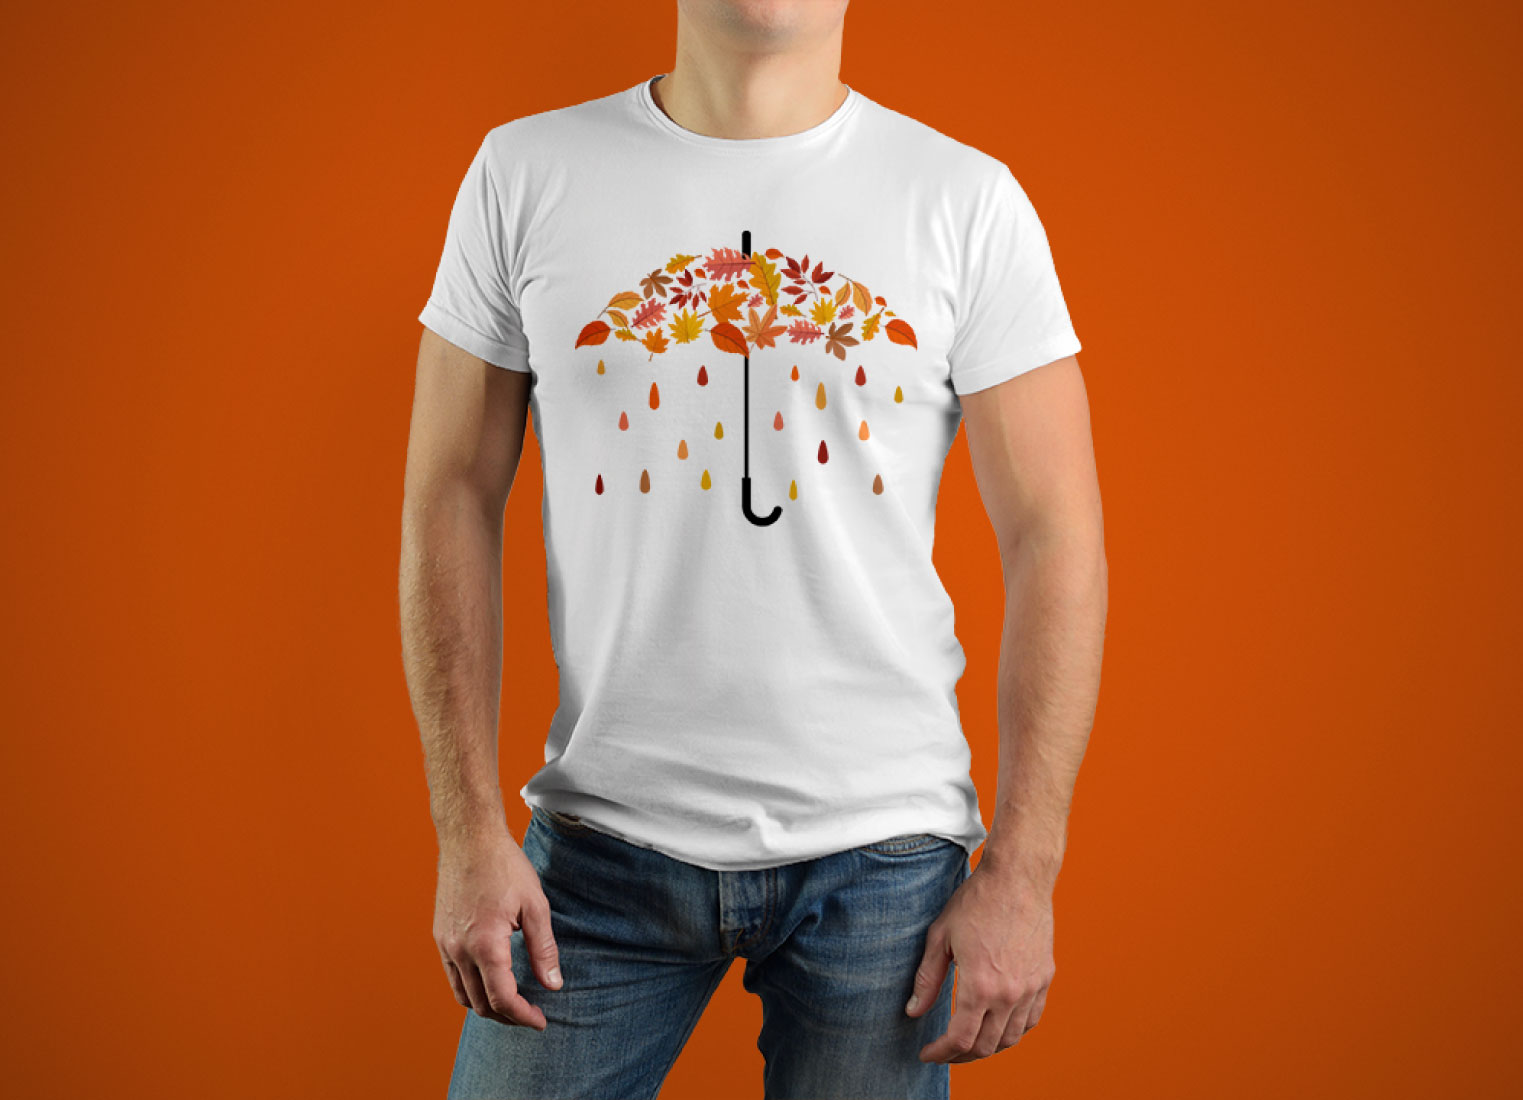 autumn leaves umbrella with faling colorful drops tshirt design 745